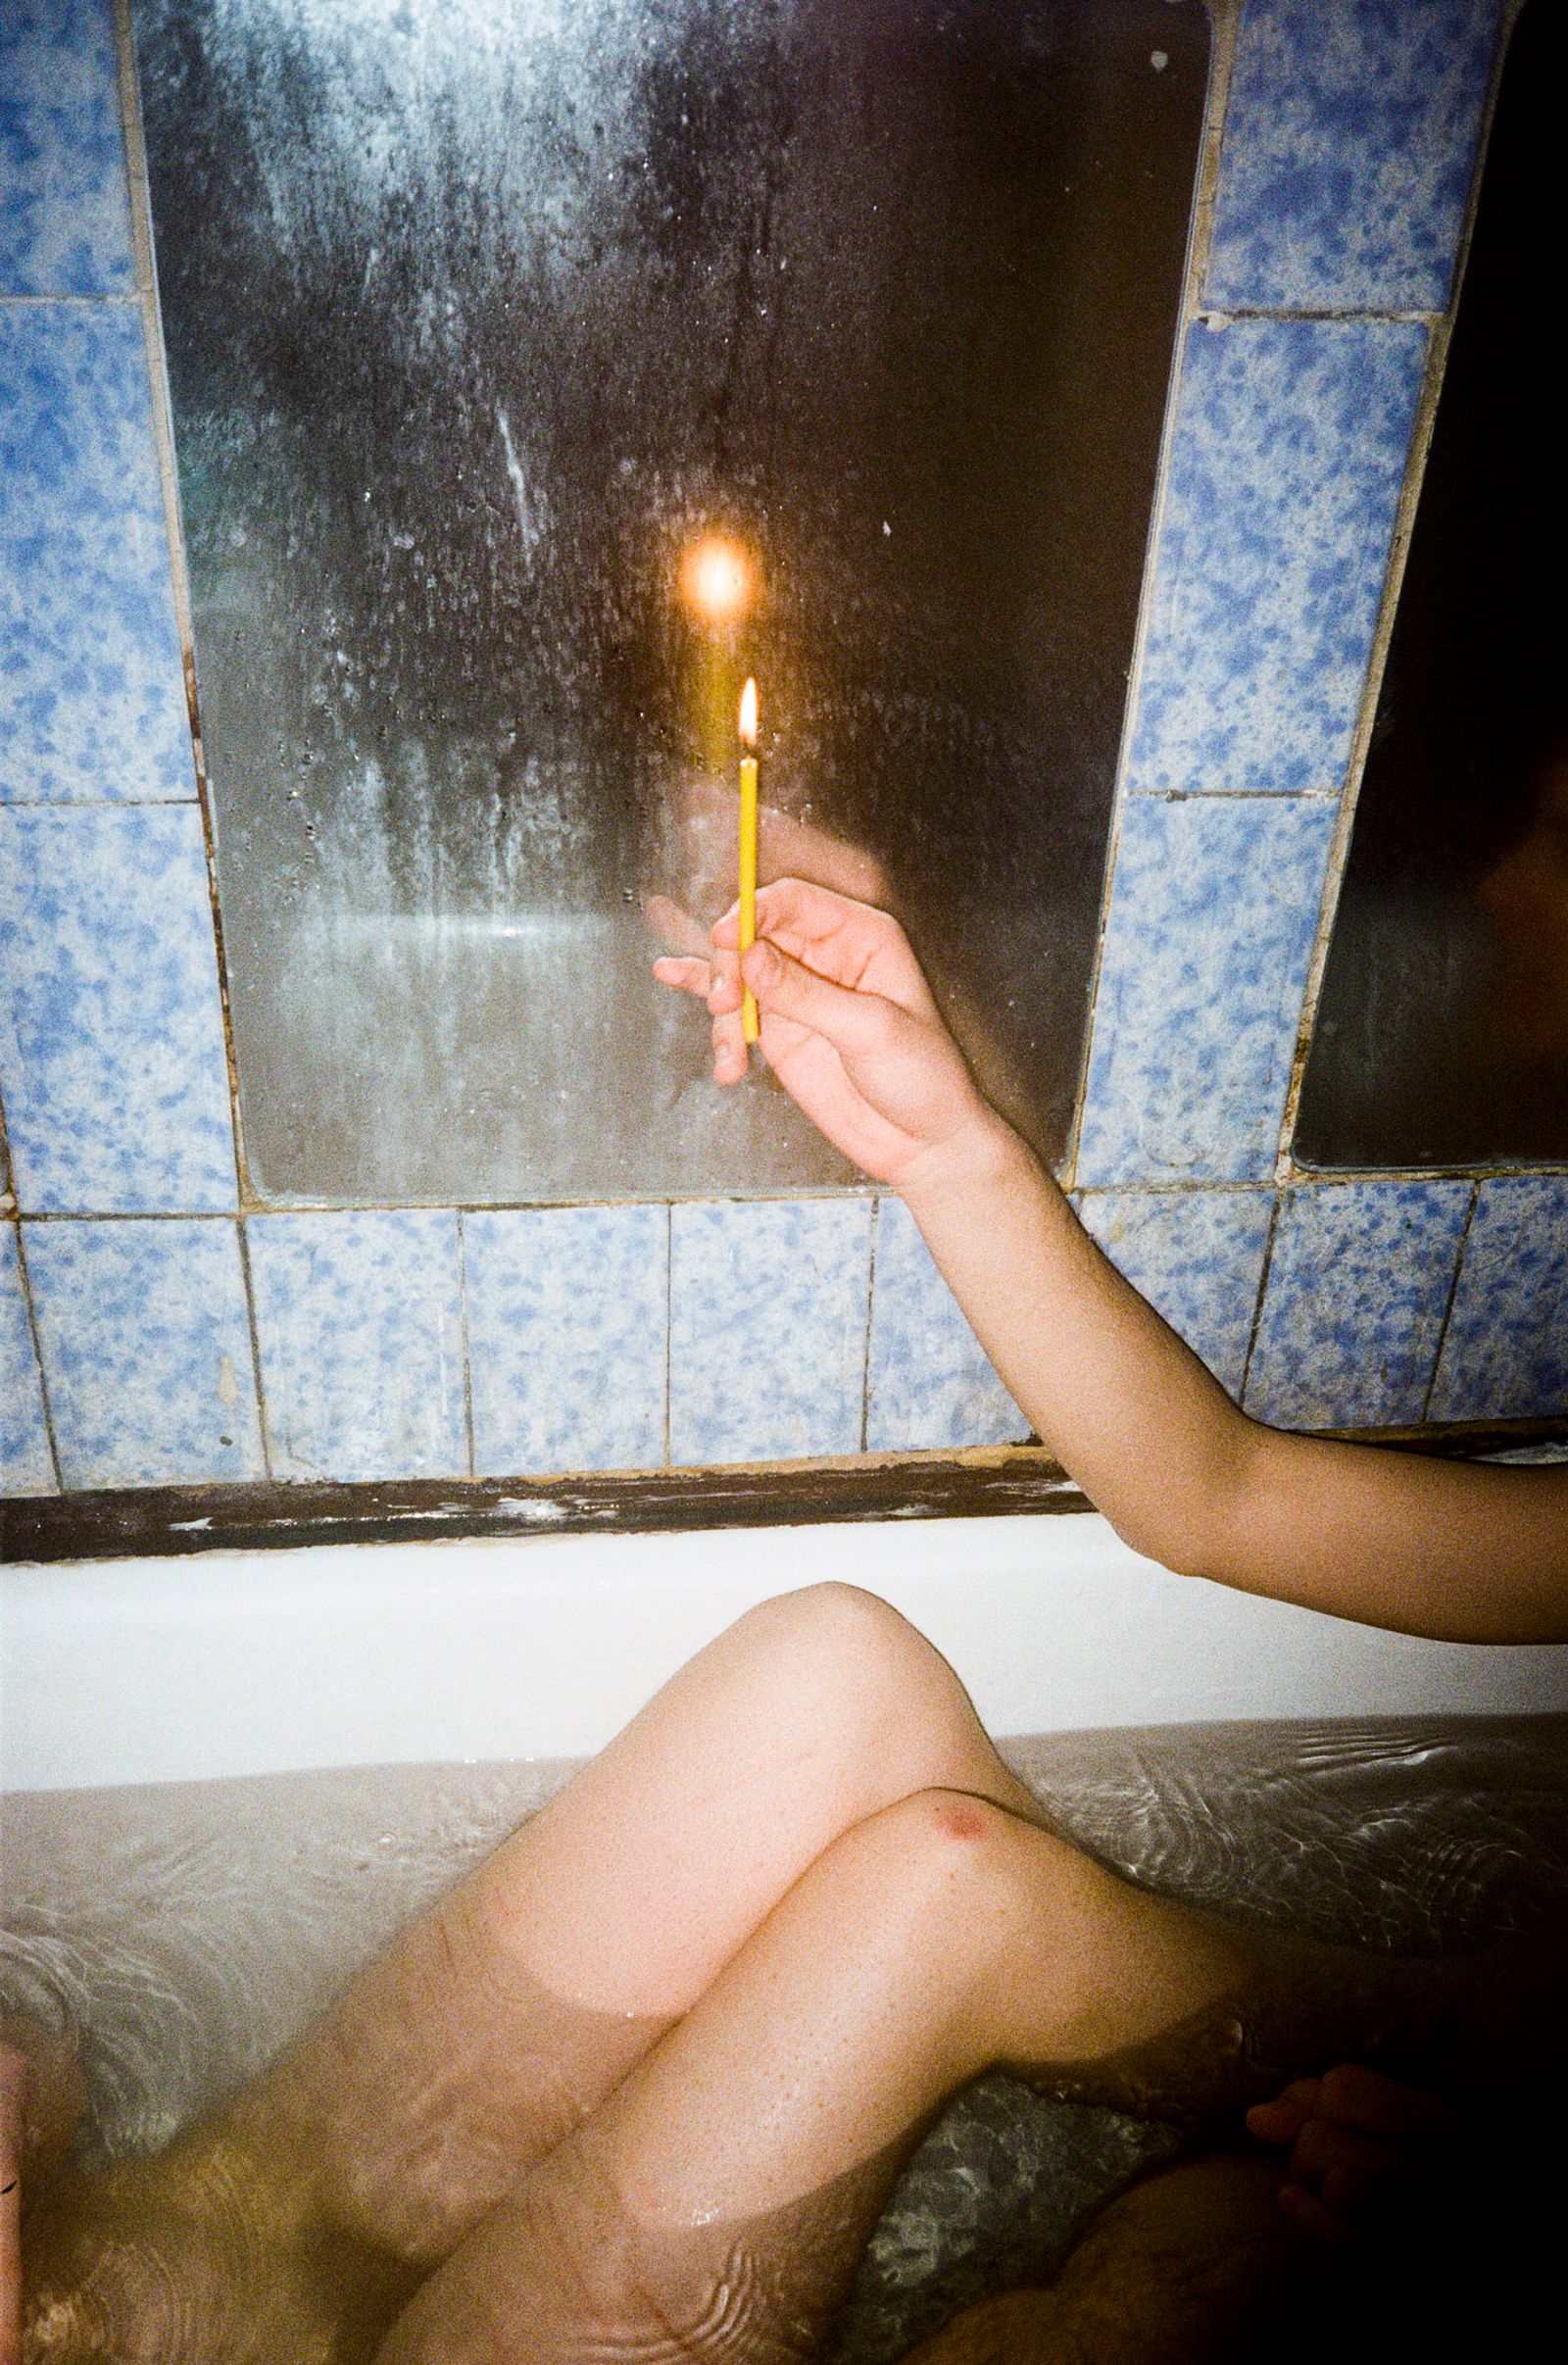 © Annemarij Gulbe - Image from the Love Re-Search photography project